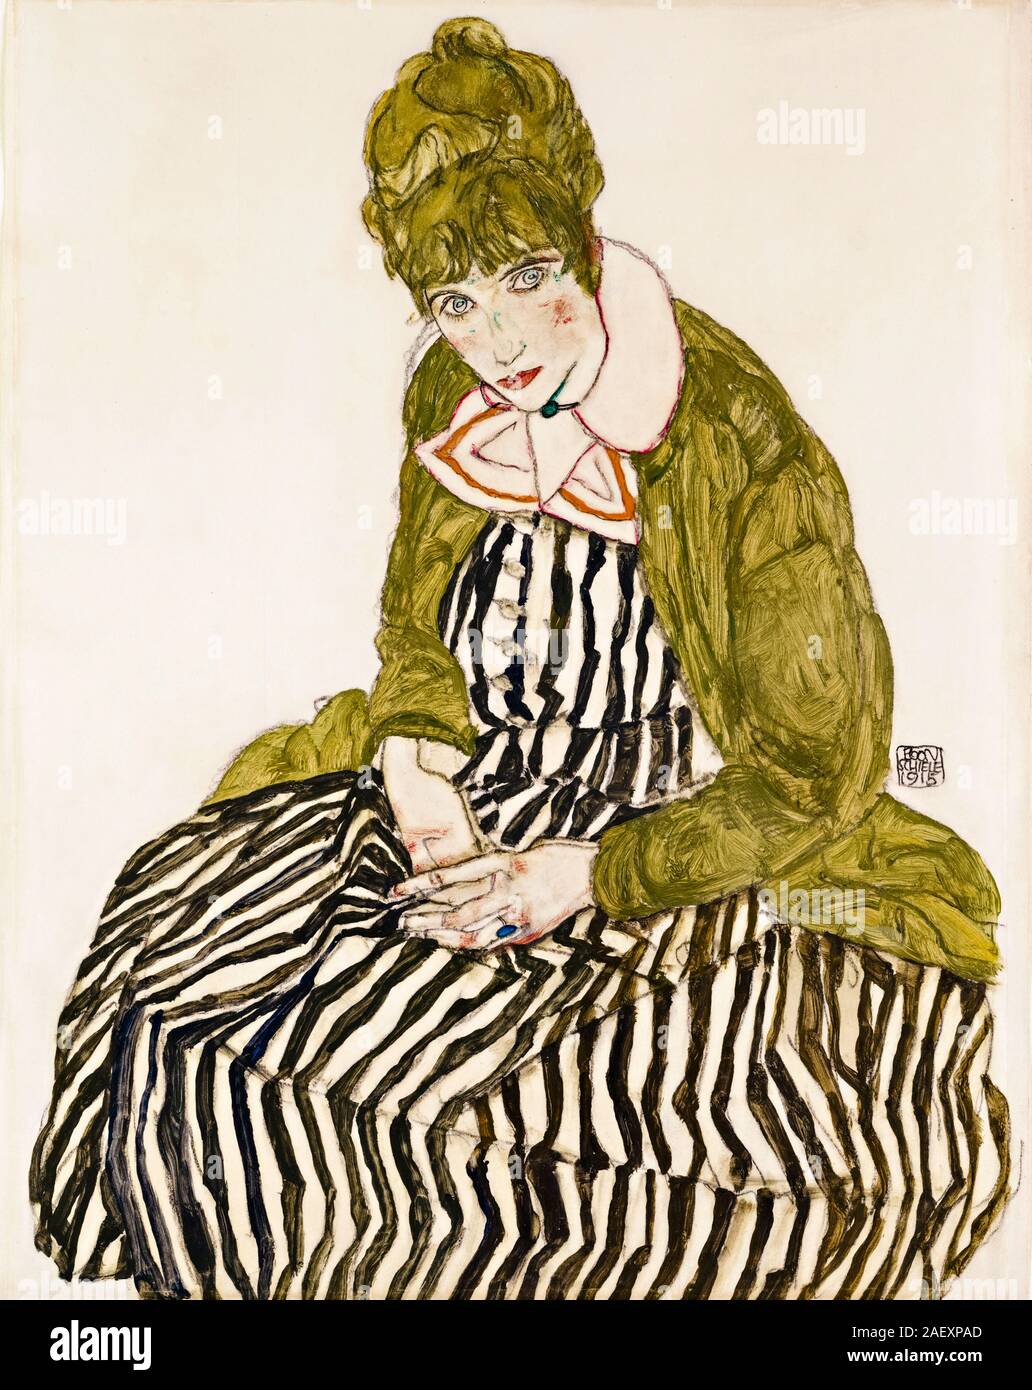 Egon Schiele, Edith with Striped Dress, Sitting, painting, 1915 Stock Photo